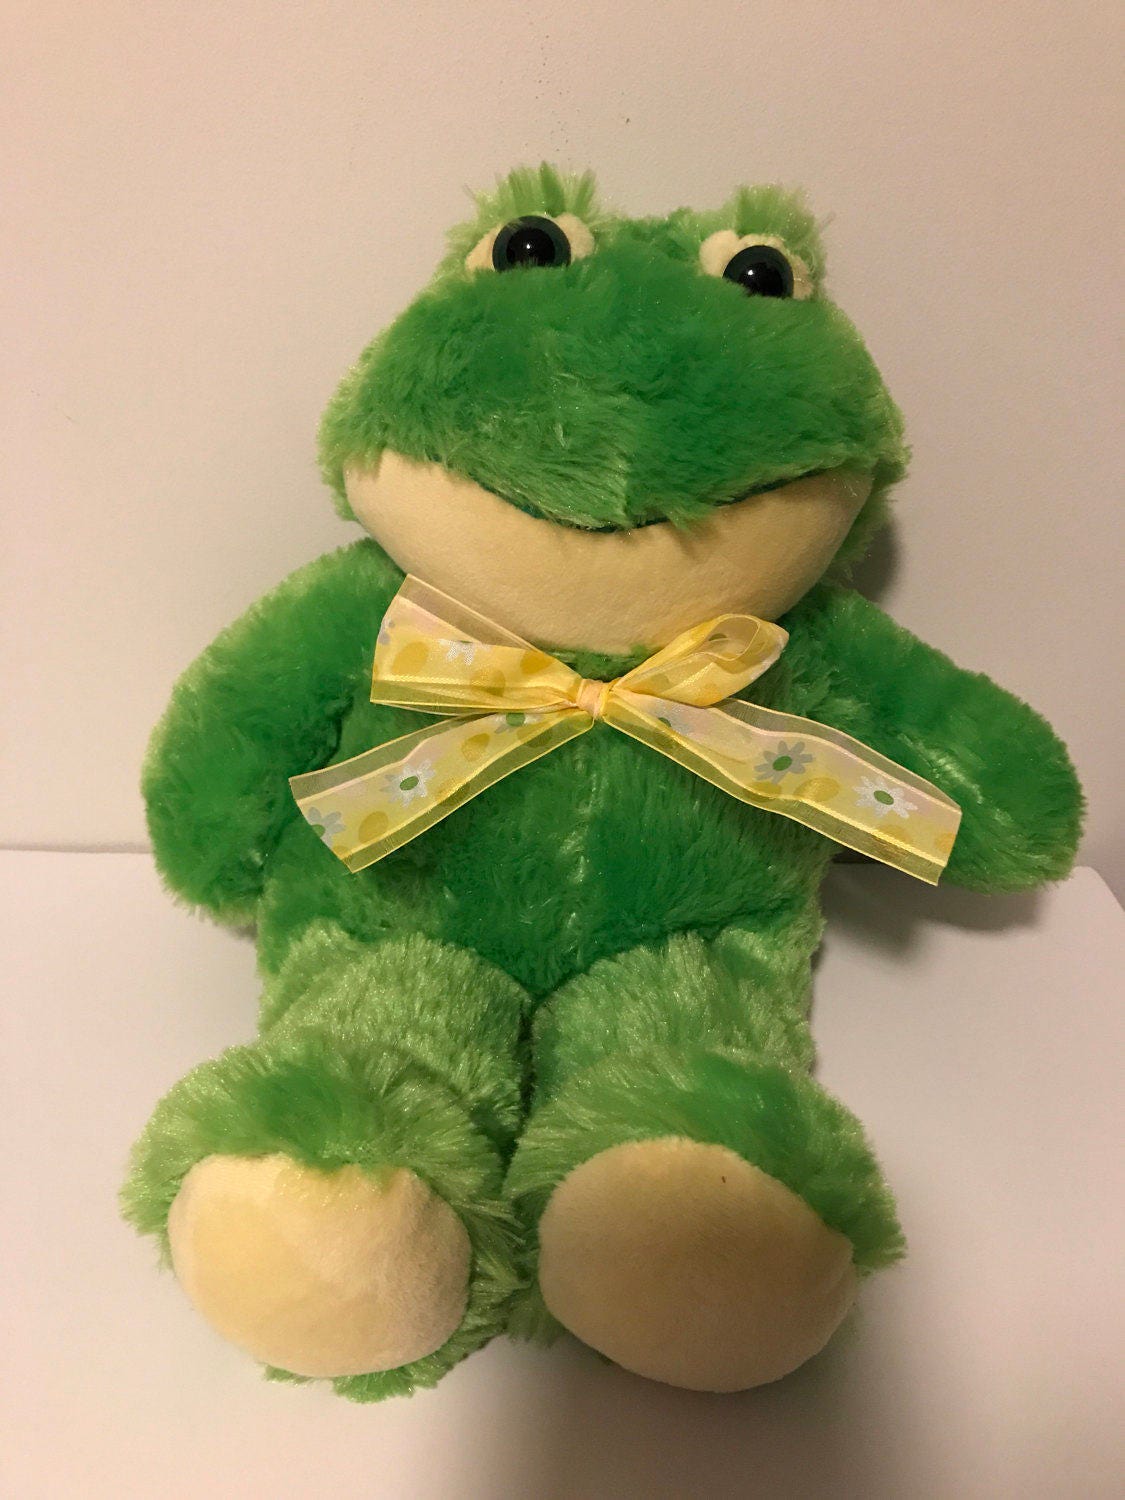 Weighted stuffed animal frog large 6 lbs sensory toy